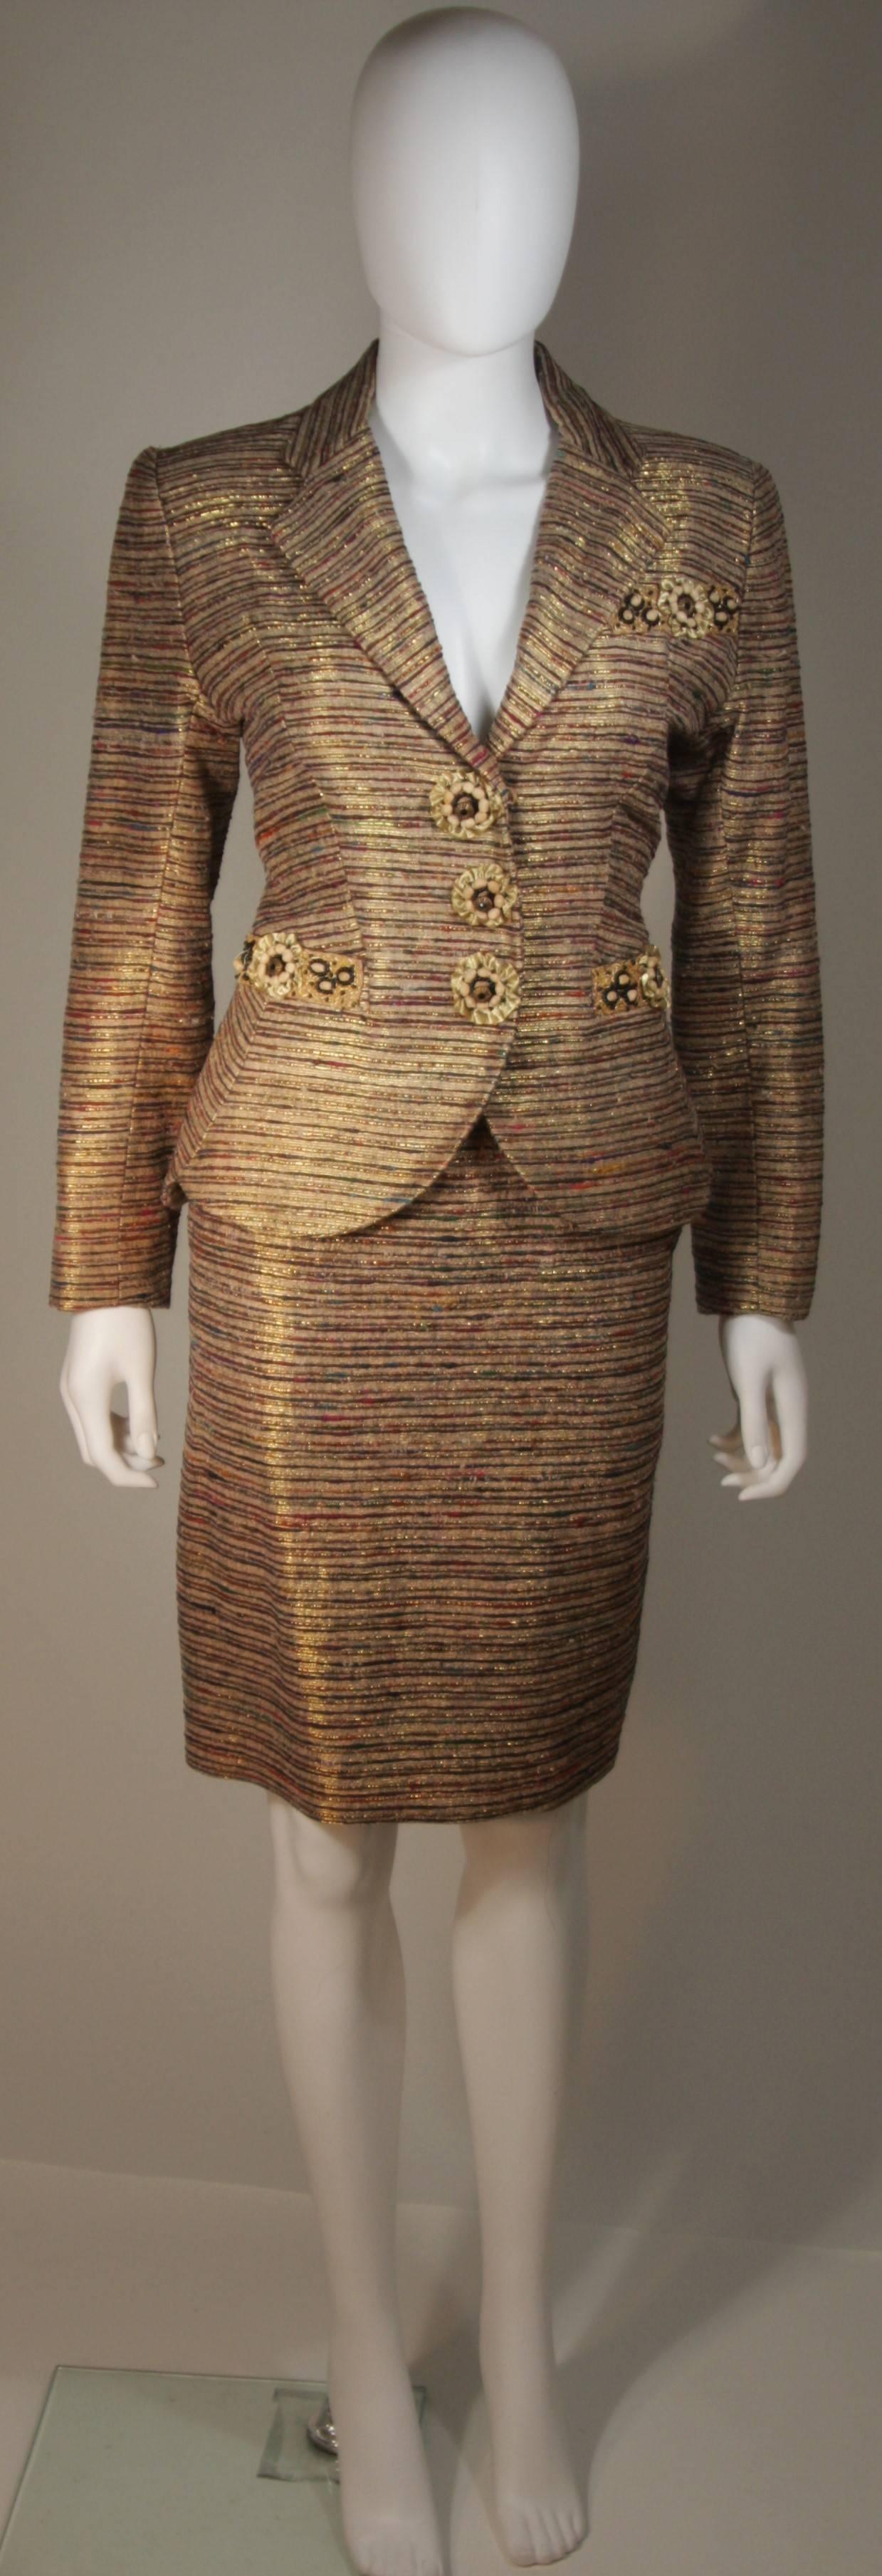 This Zandra Rhodes  skirt suit is composed of a metallic raw silk in hues of bronze to burgundy. There are applique details on the jacket as well as center front snap closures. The skirt is a classic pencil style with zipper closures. In excellent